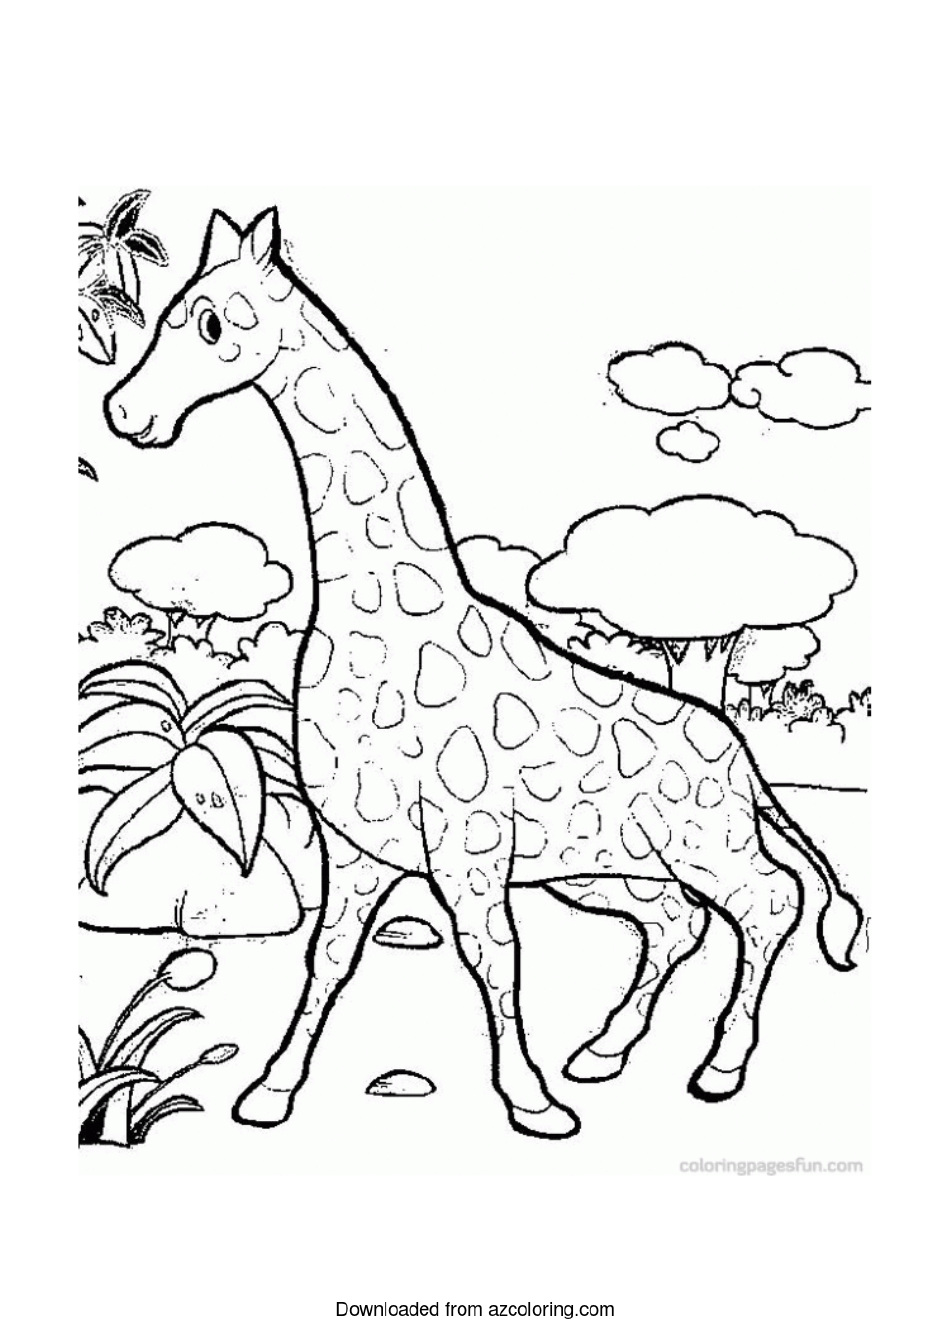 Preview of a running giraffe coloring page